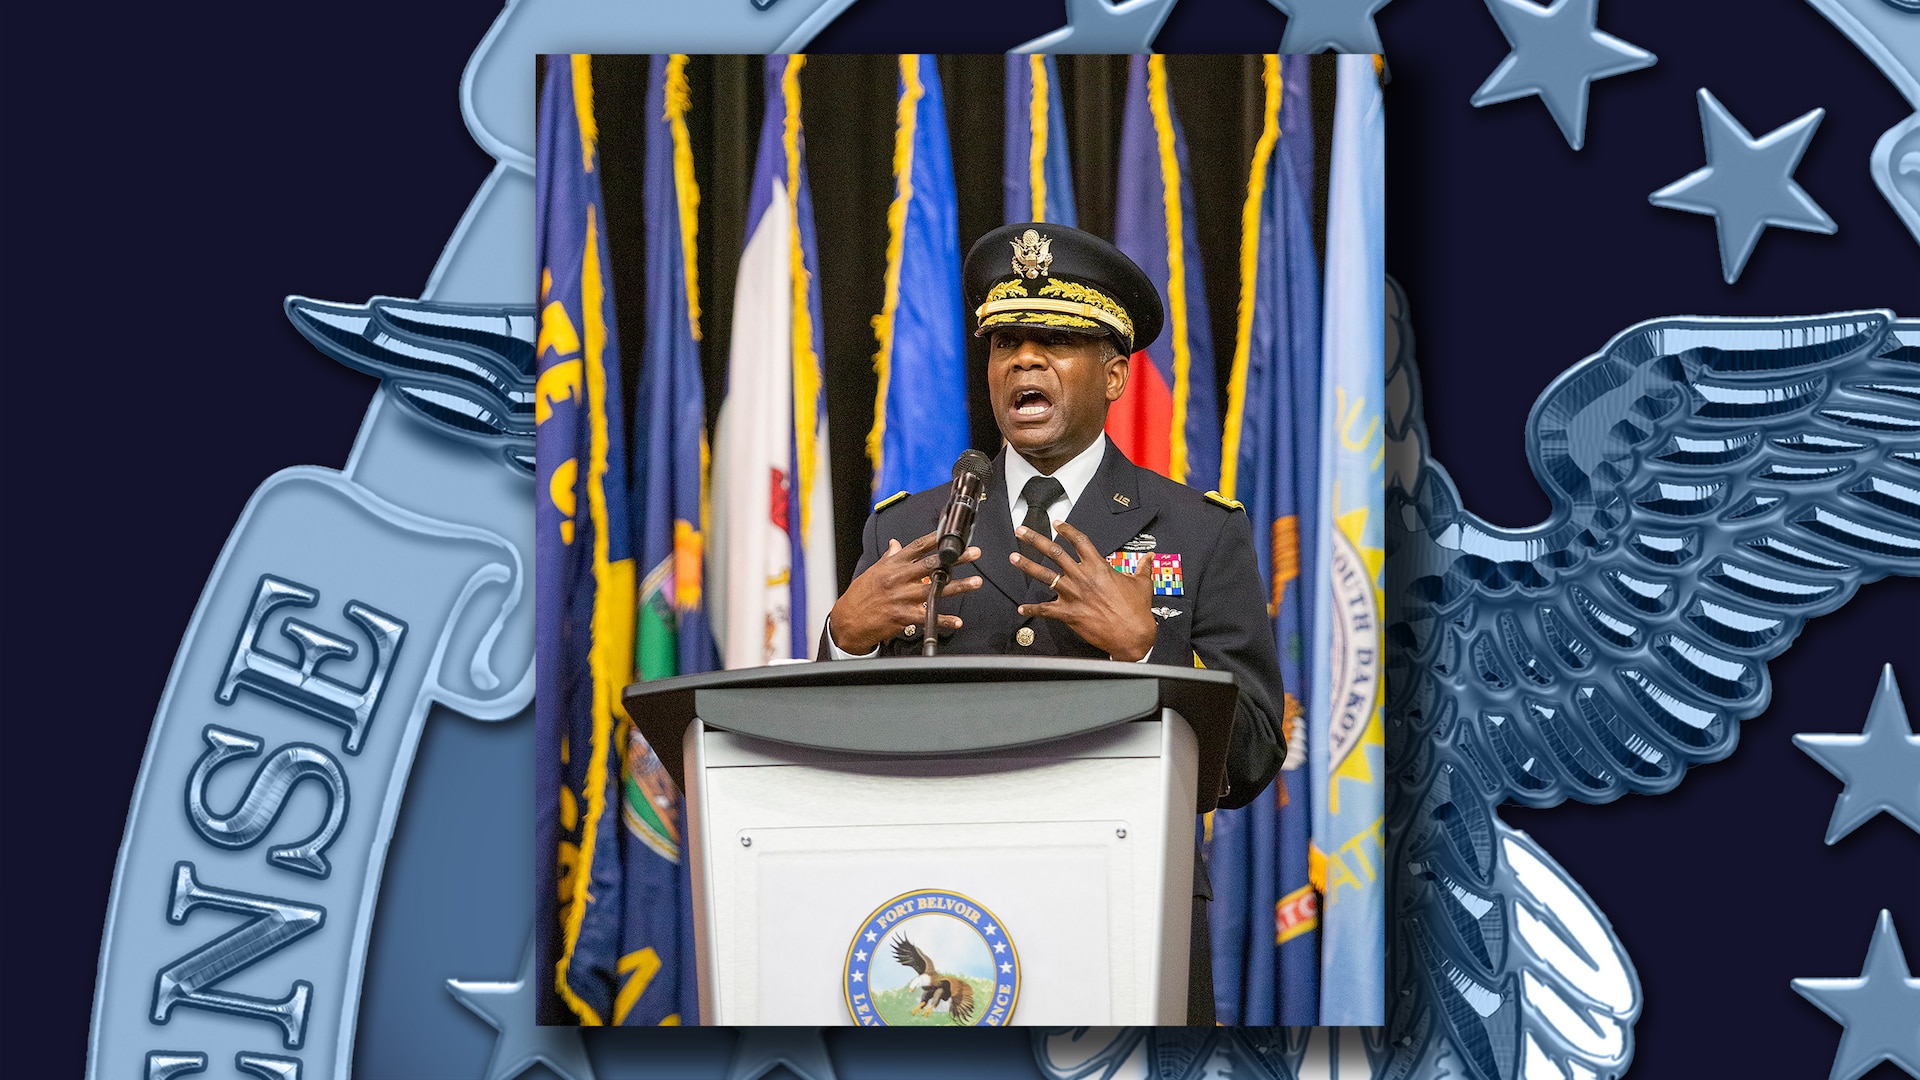 Army Lt. Gen. Darrell K. Williams delivers a keynote address from behind a lectern with flags in the background.